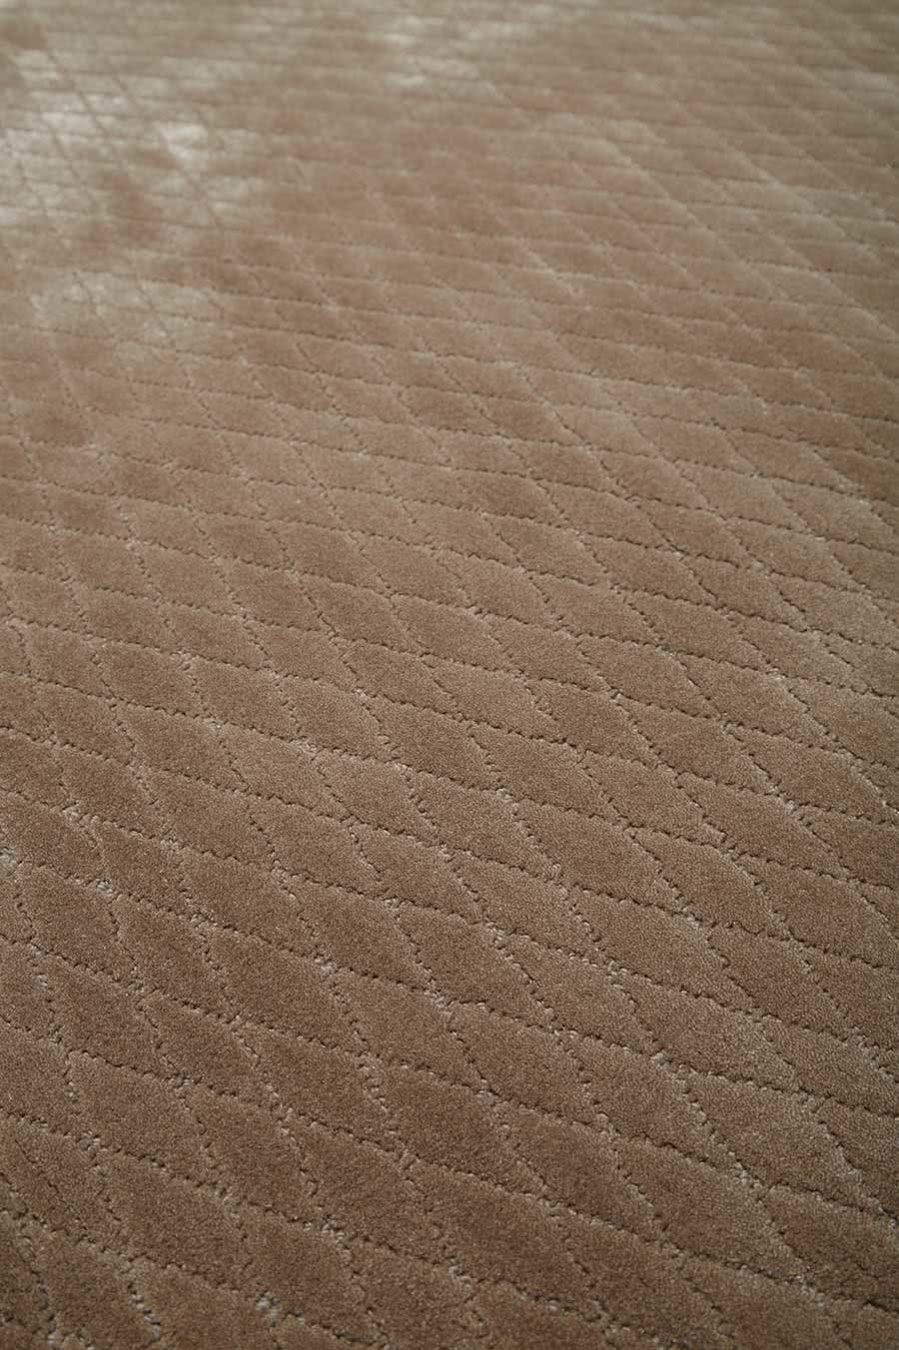 Close up view of textured Diamond Velour rug in taupe brown colour